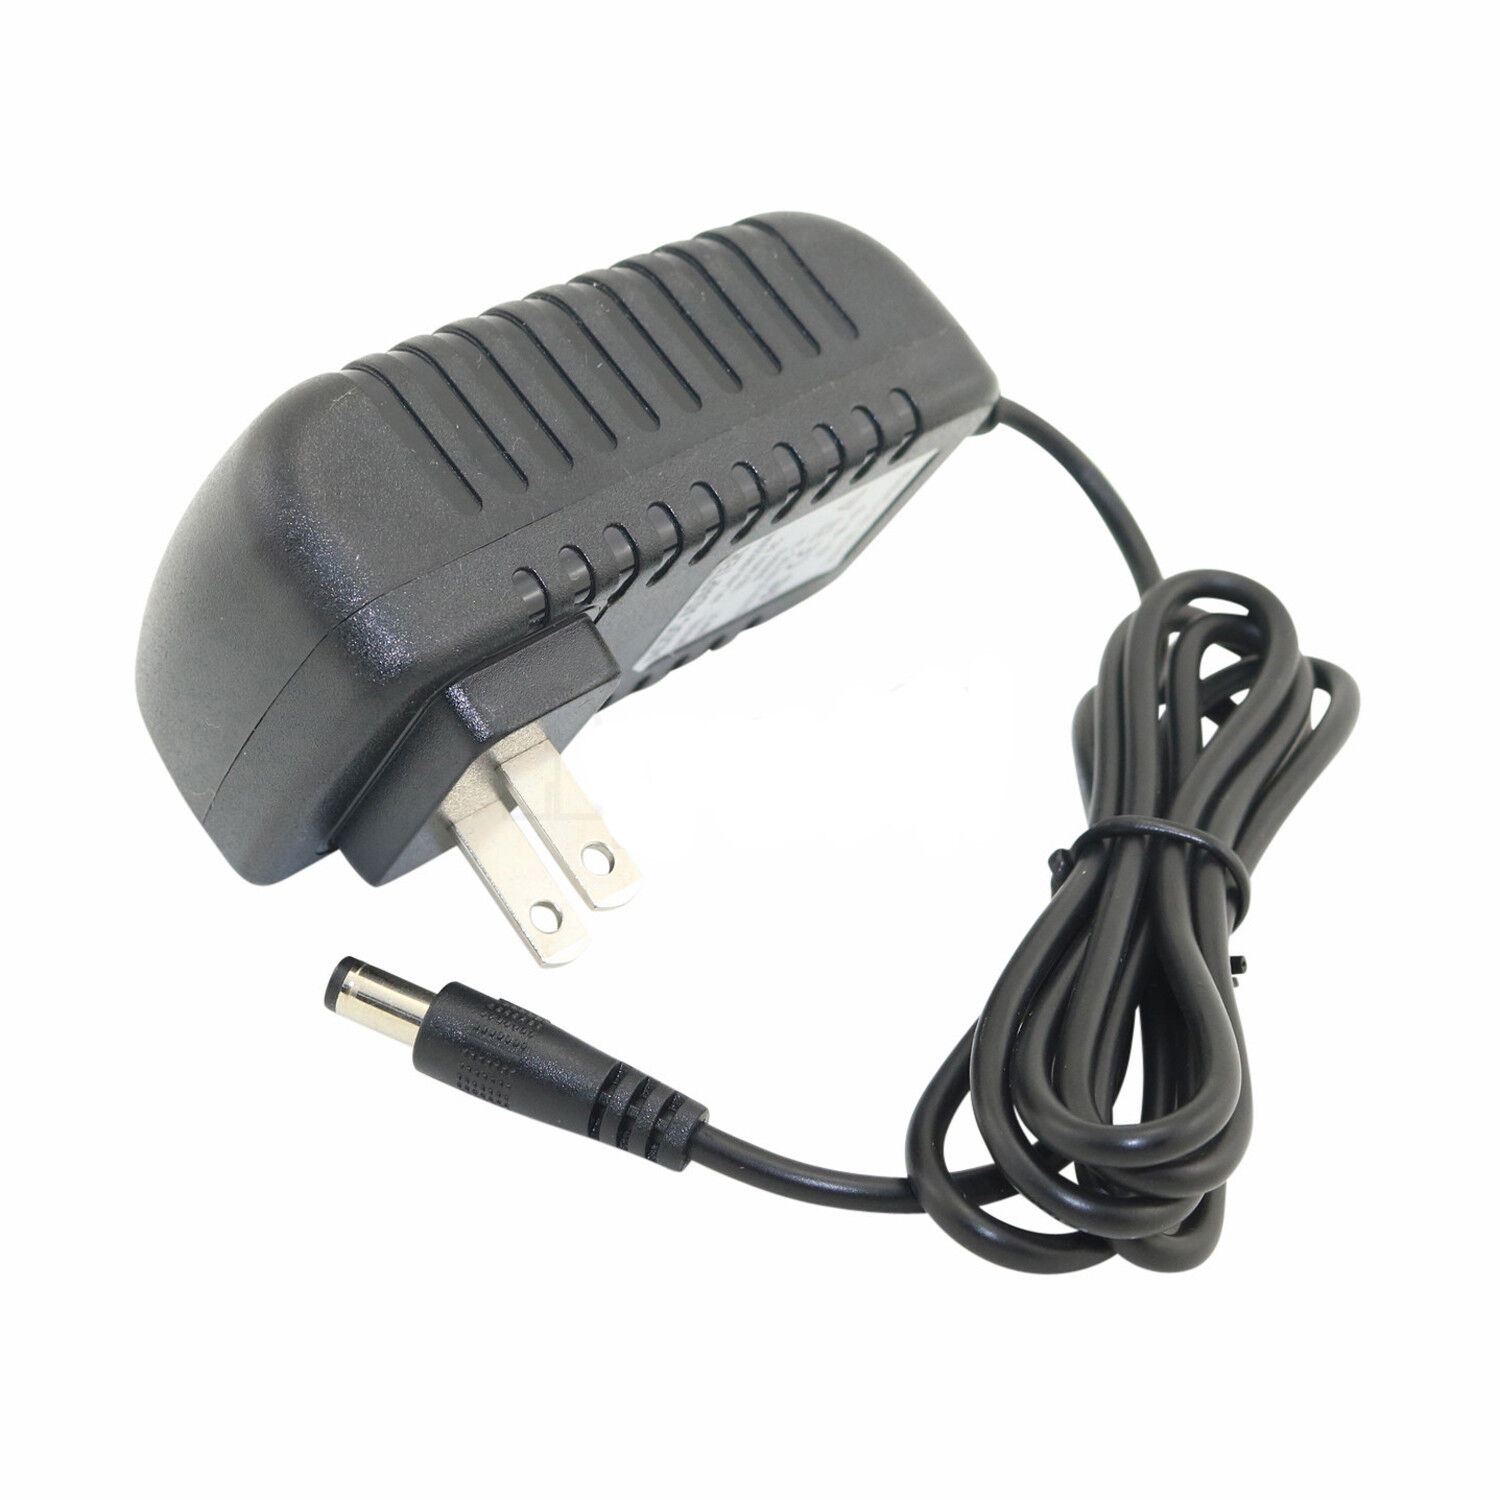 AC to AC Adapter Compatible with Jameco Reliapro ACU120100D0531 Straight 2.5 mm Female Plug 12V Transformer, ETL Listed